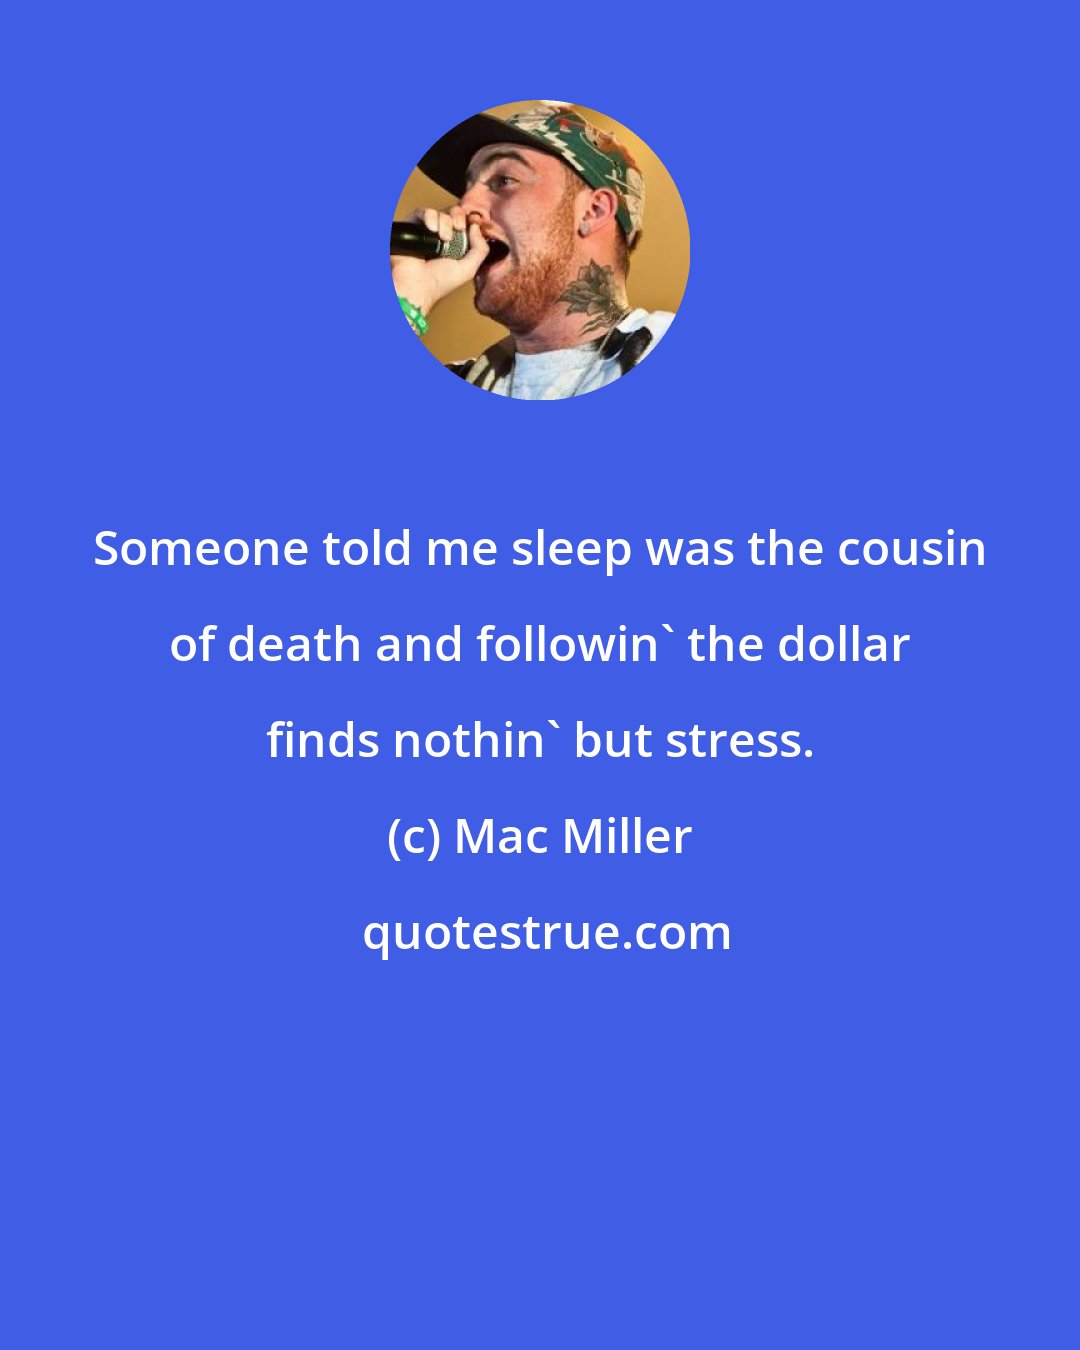 Mac Miller: Someone told me sleep was the cousin of death and followin' the dollar finds nothin' but stress.